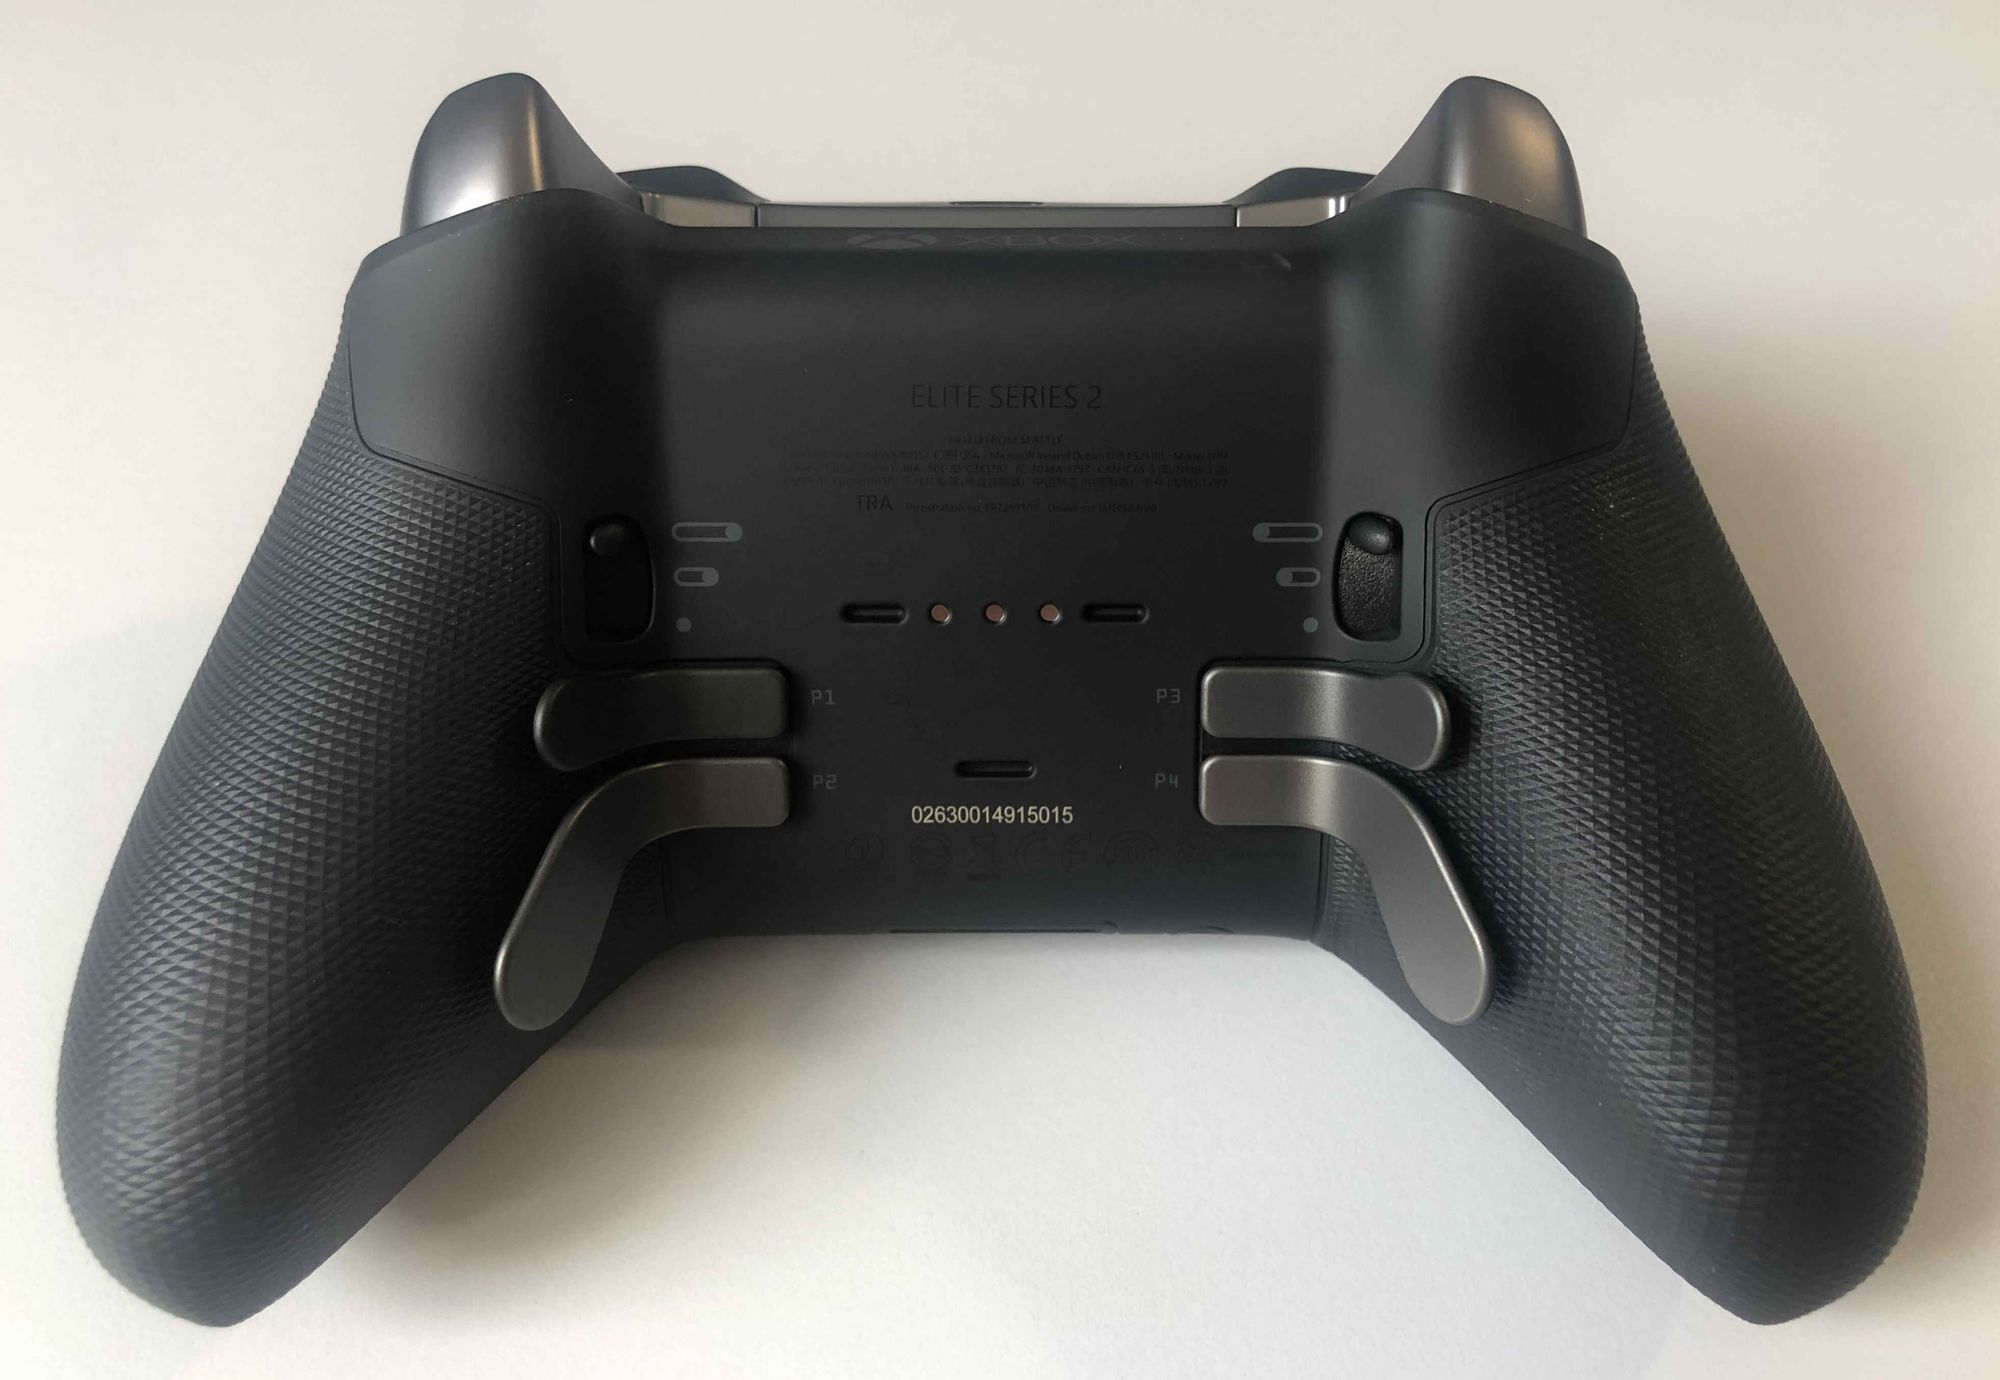 Back of the Xbox Elite Series 2 Wireless Controller